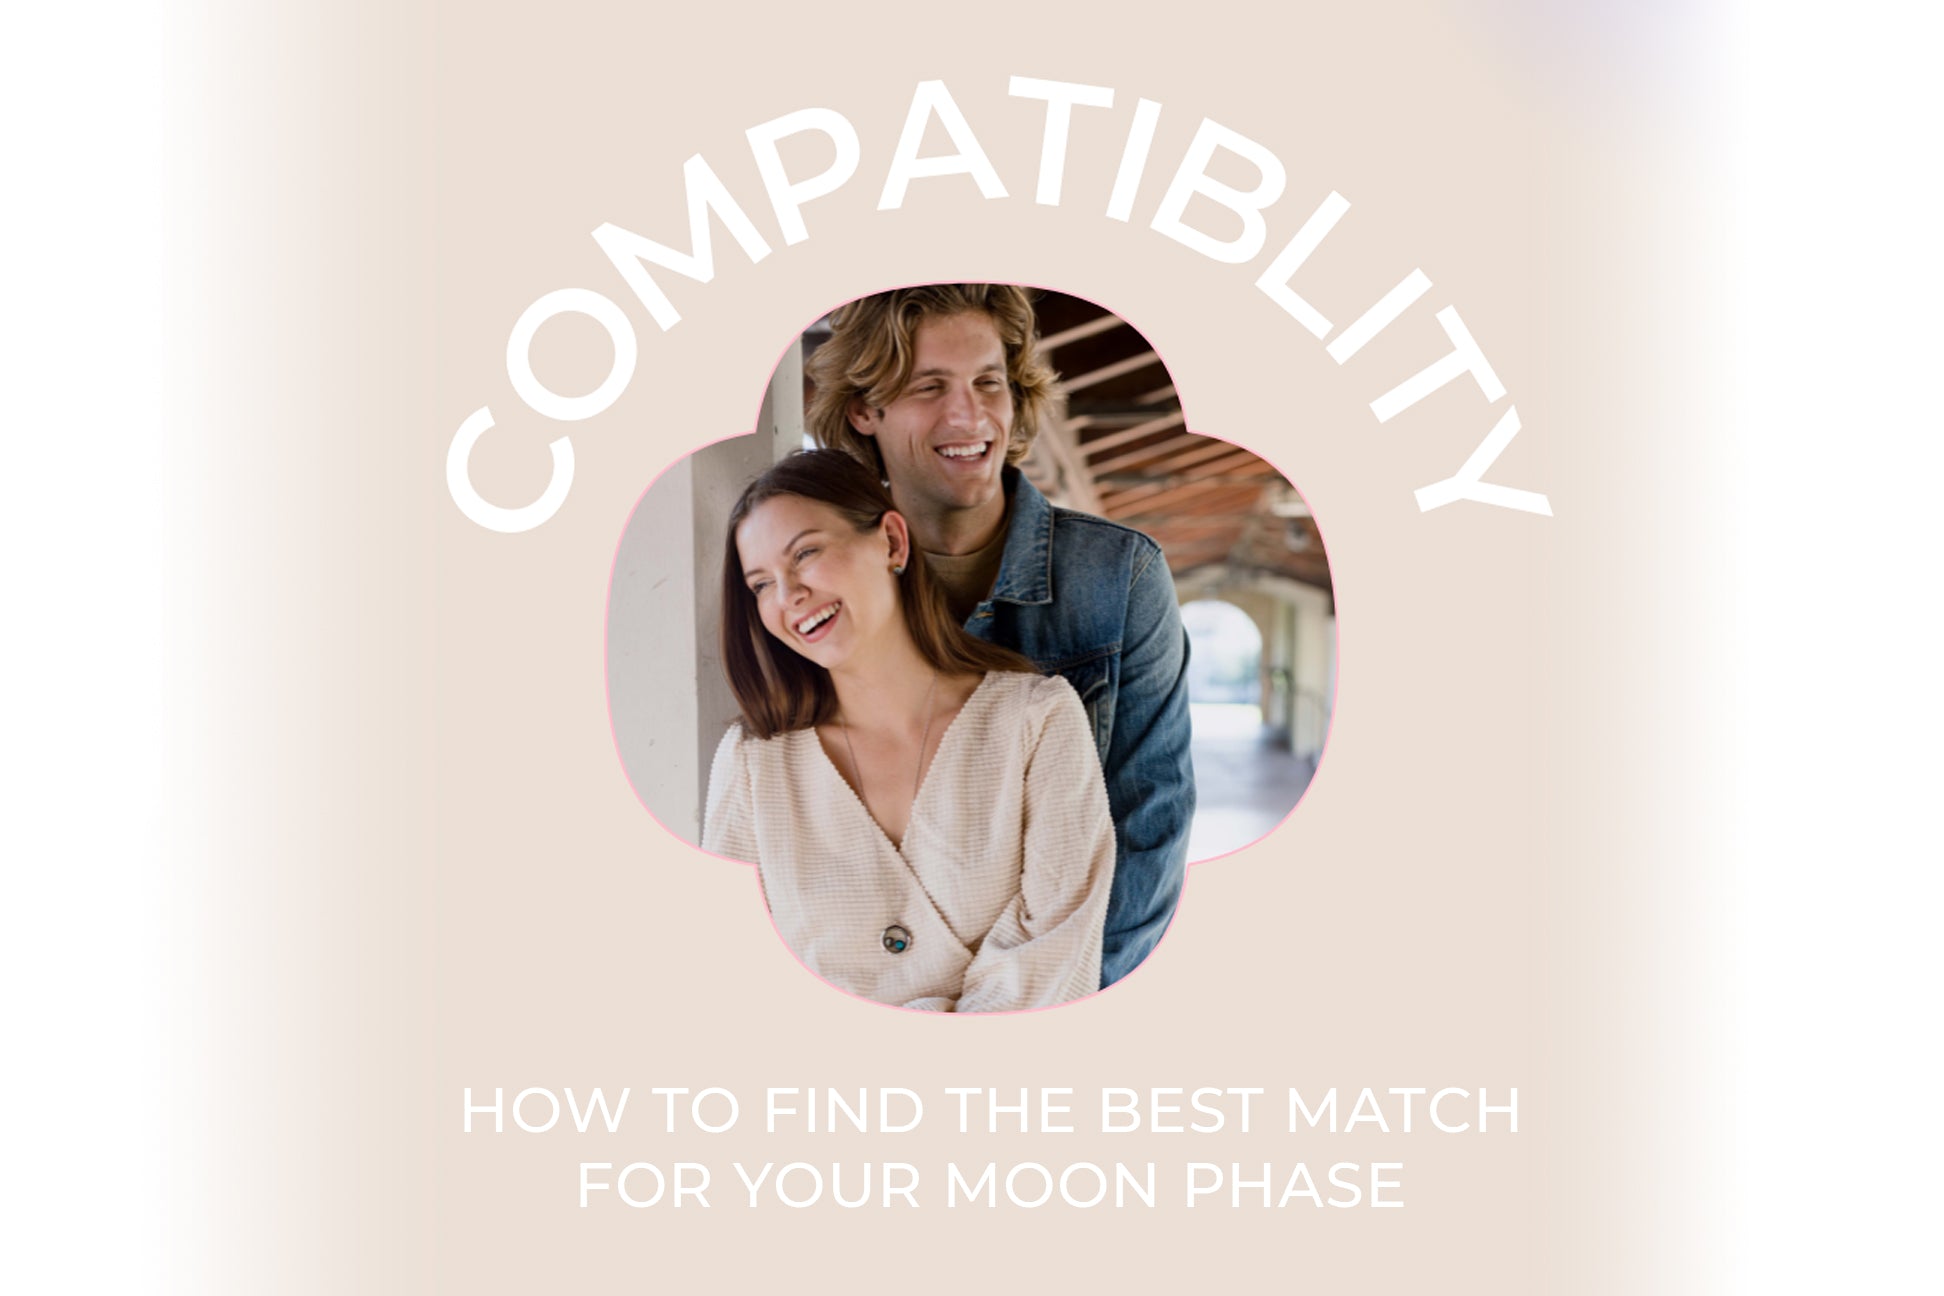 Compatibility: How to Find the Best Match for Your Moon Phase